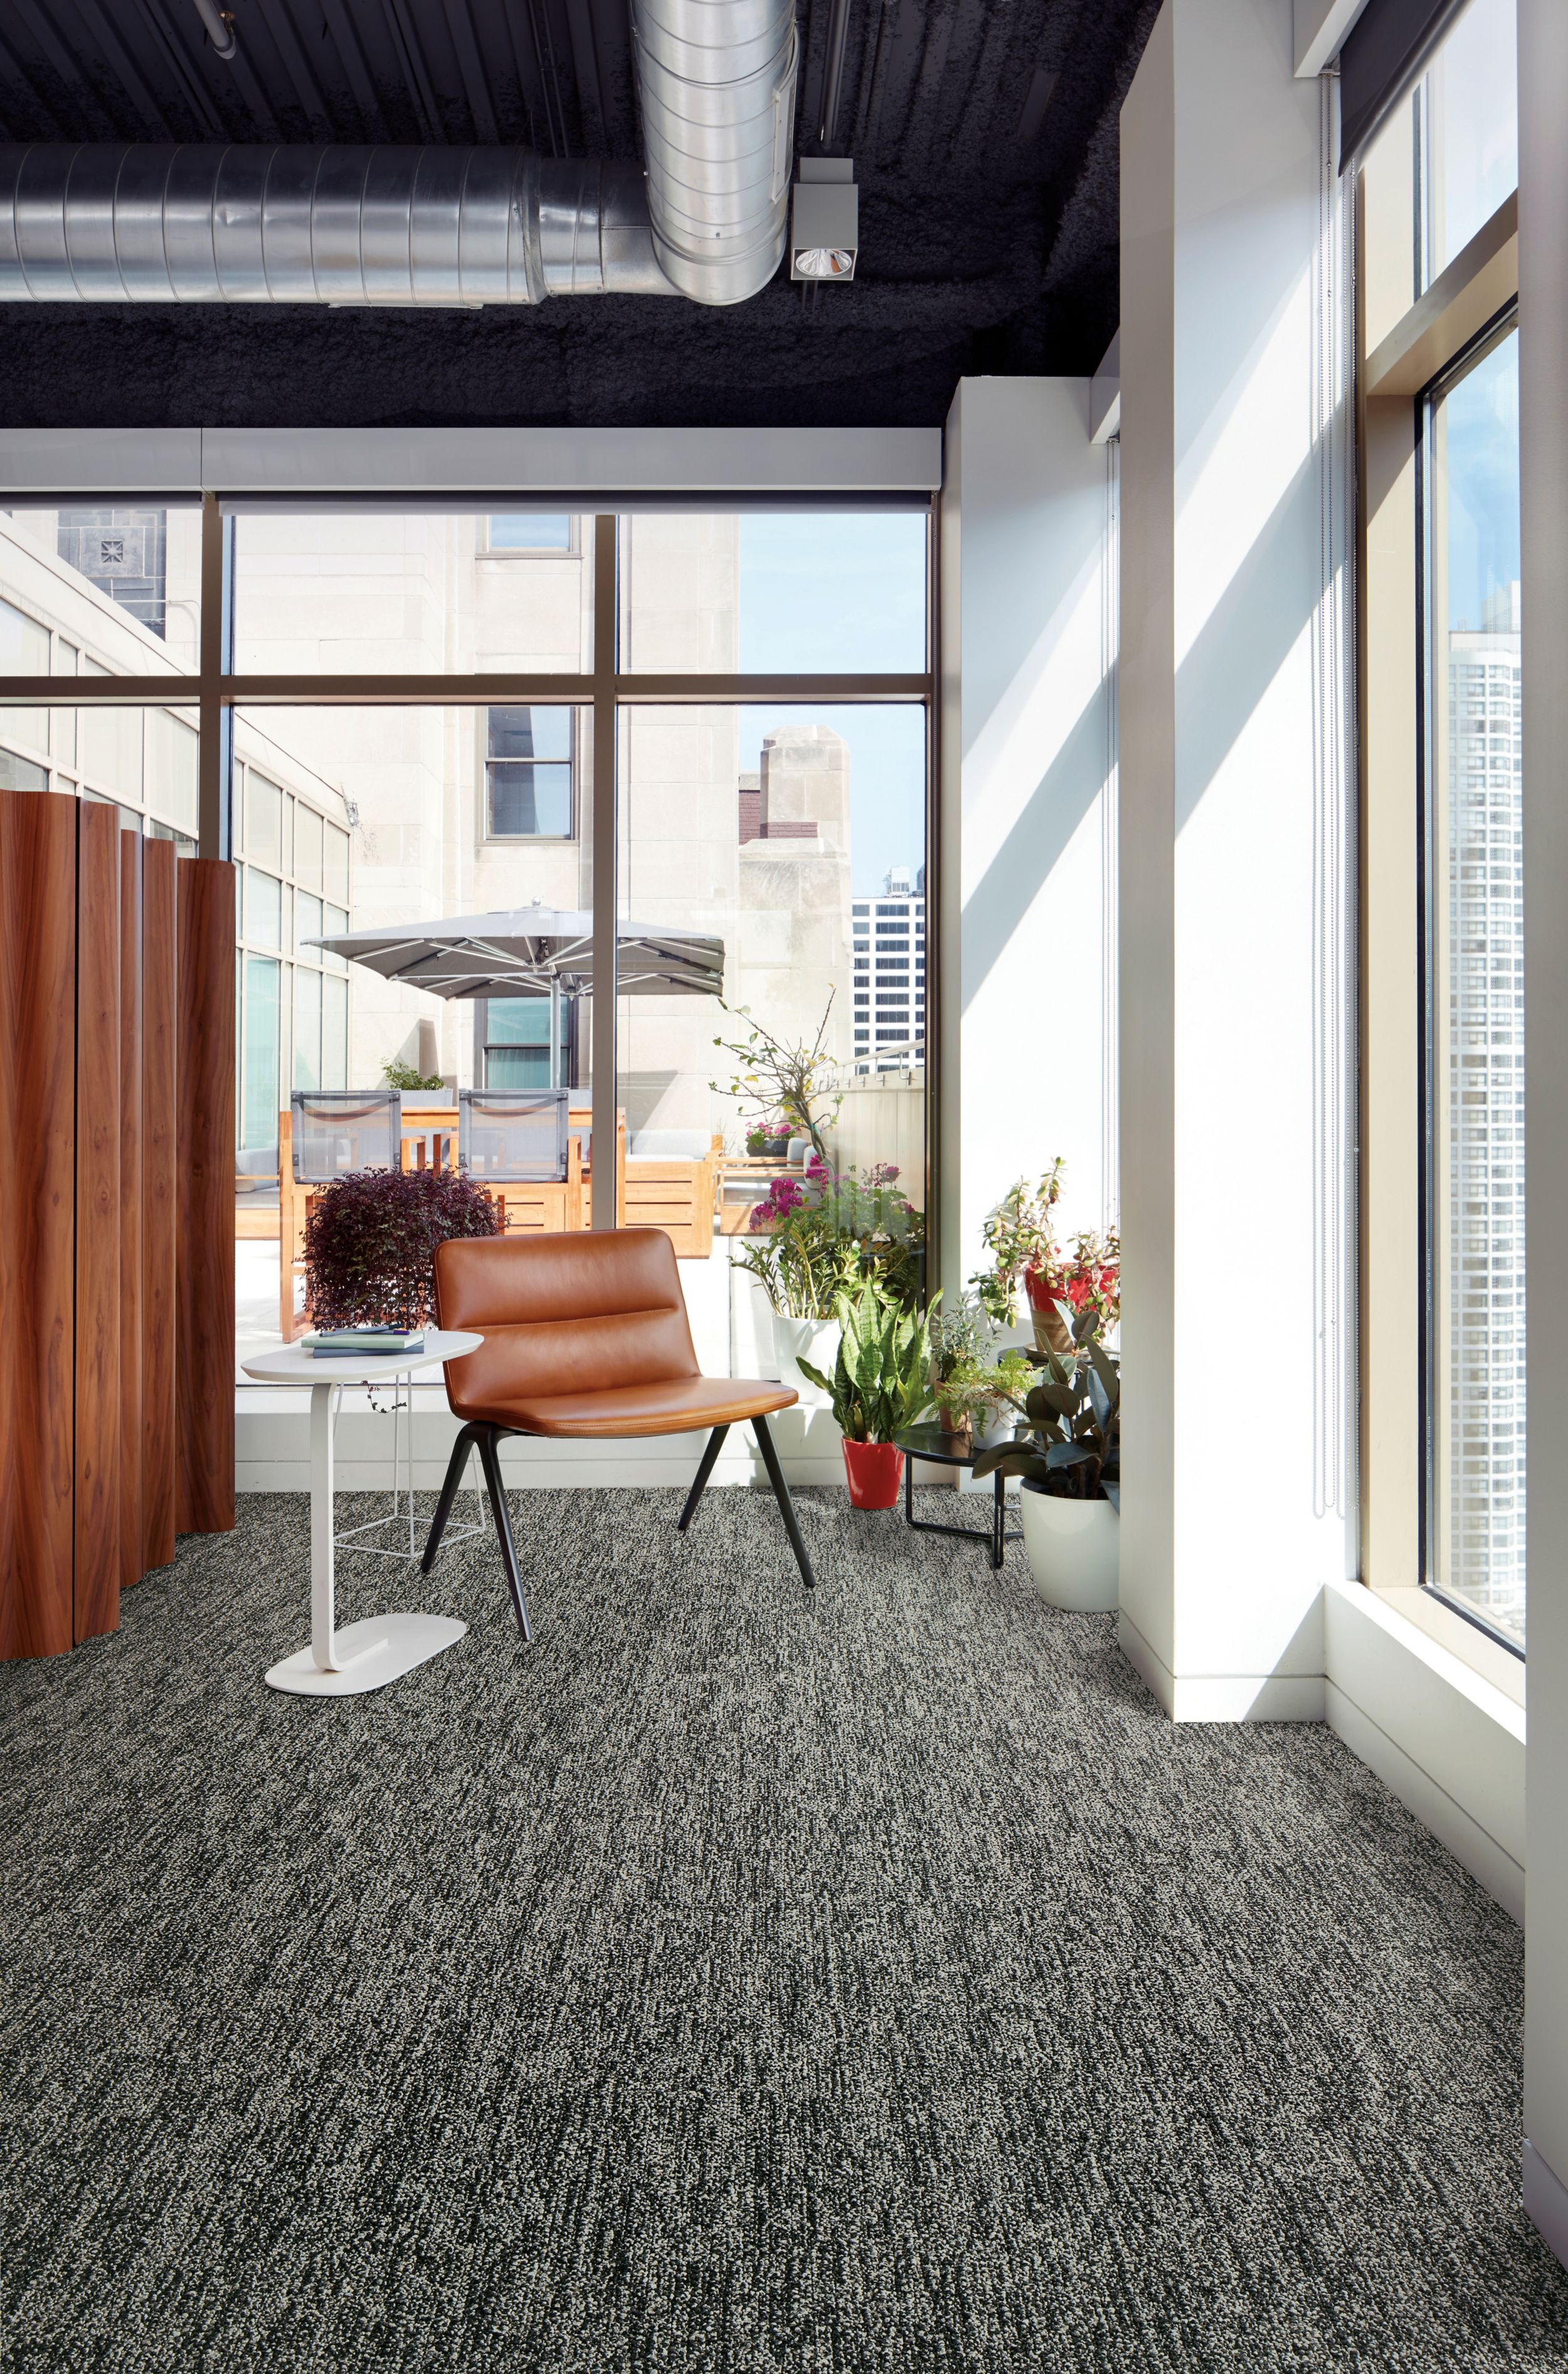 Interface Obligato plank carpet tile with leather chair and potted plants in windows numéro d’image 6